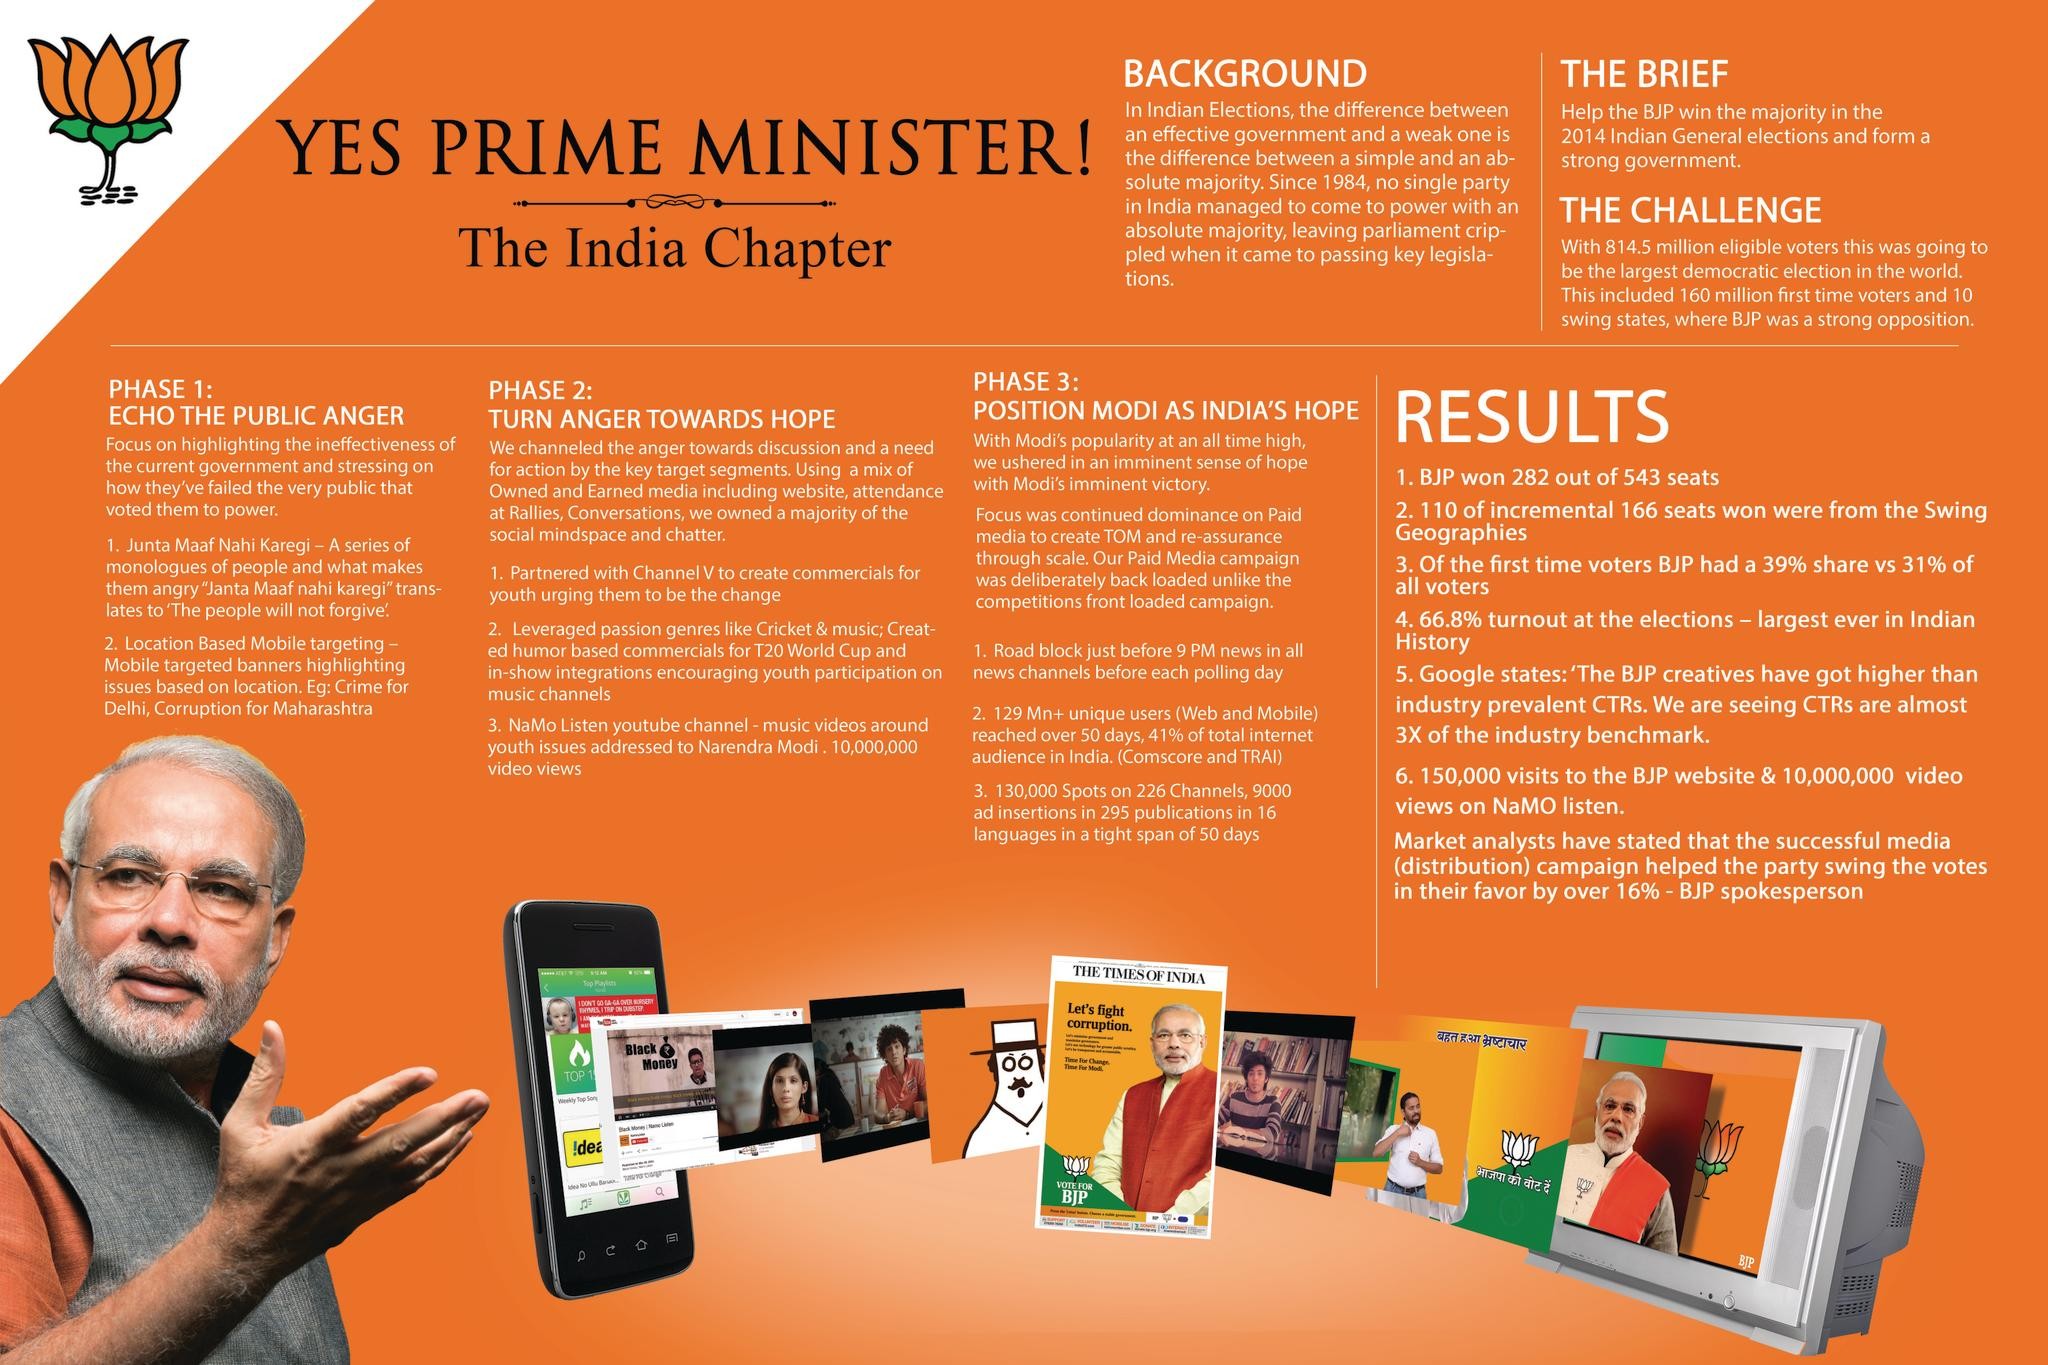 YES PRIME MINISTER ! - THE INDIA CHAPTER